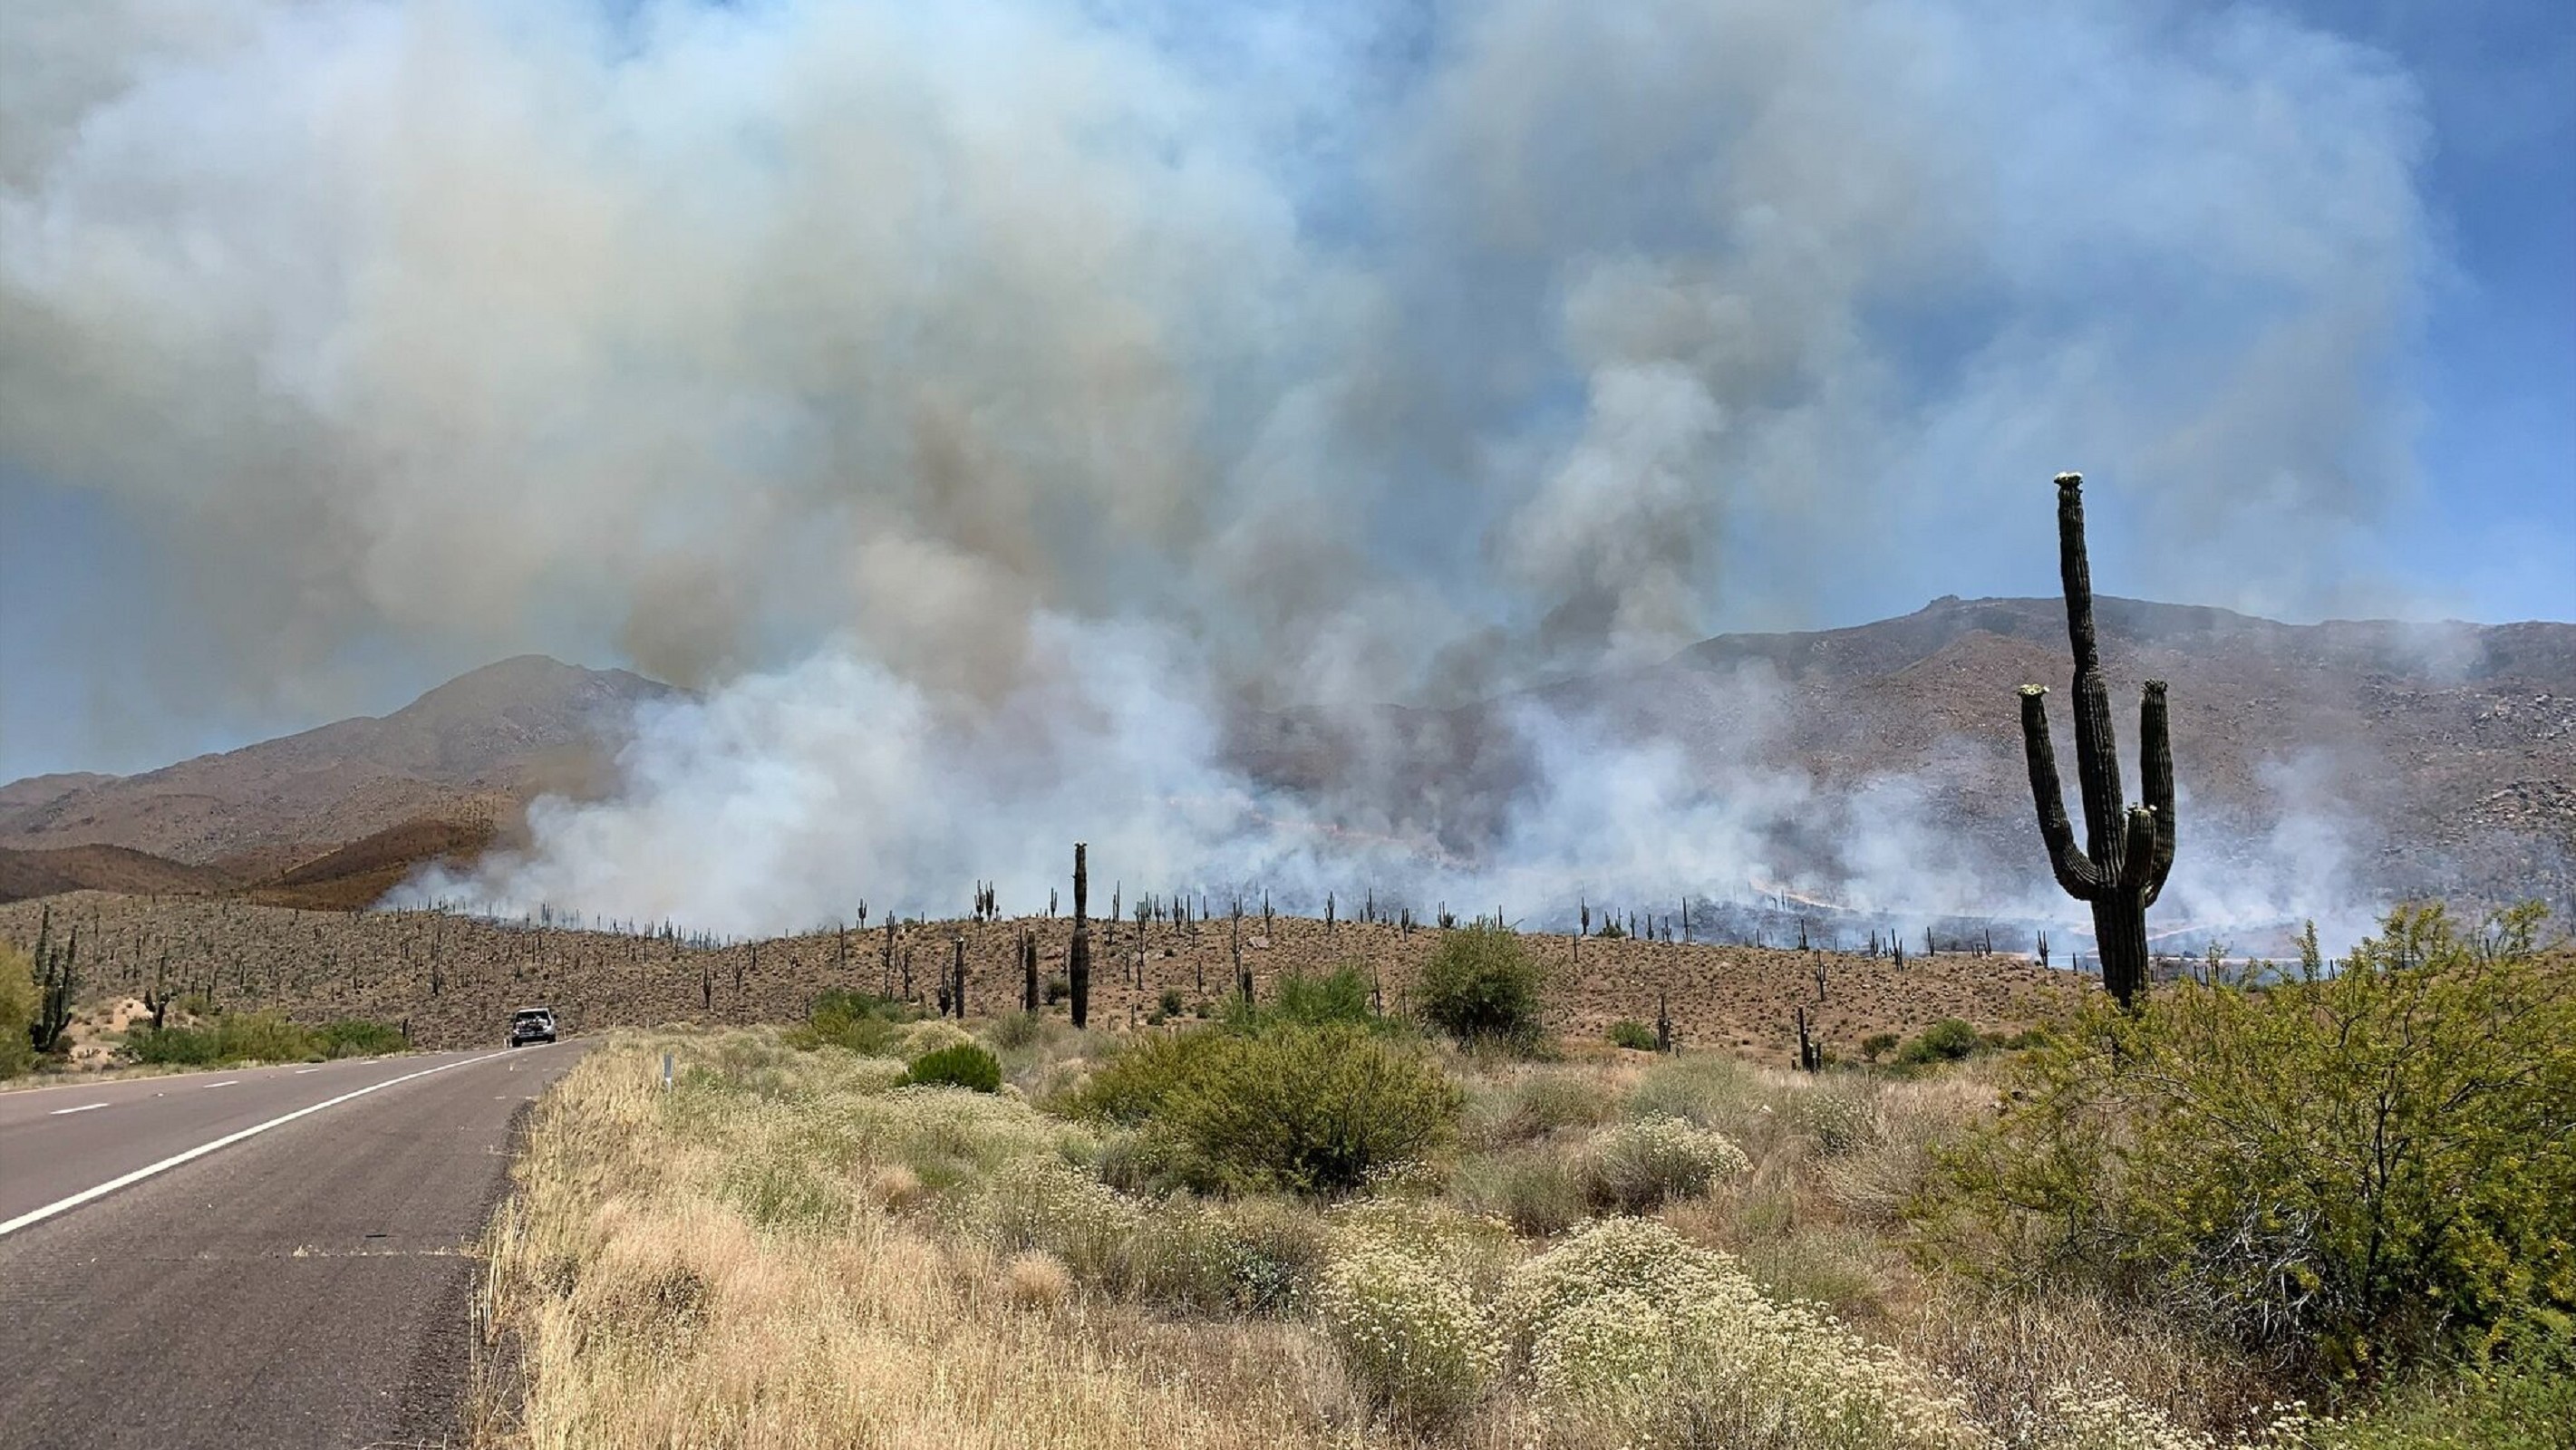 Firefighters responding to wildfire north of Phoenix near SR-87